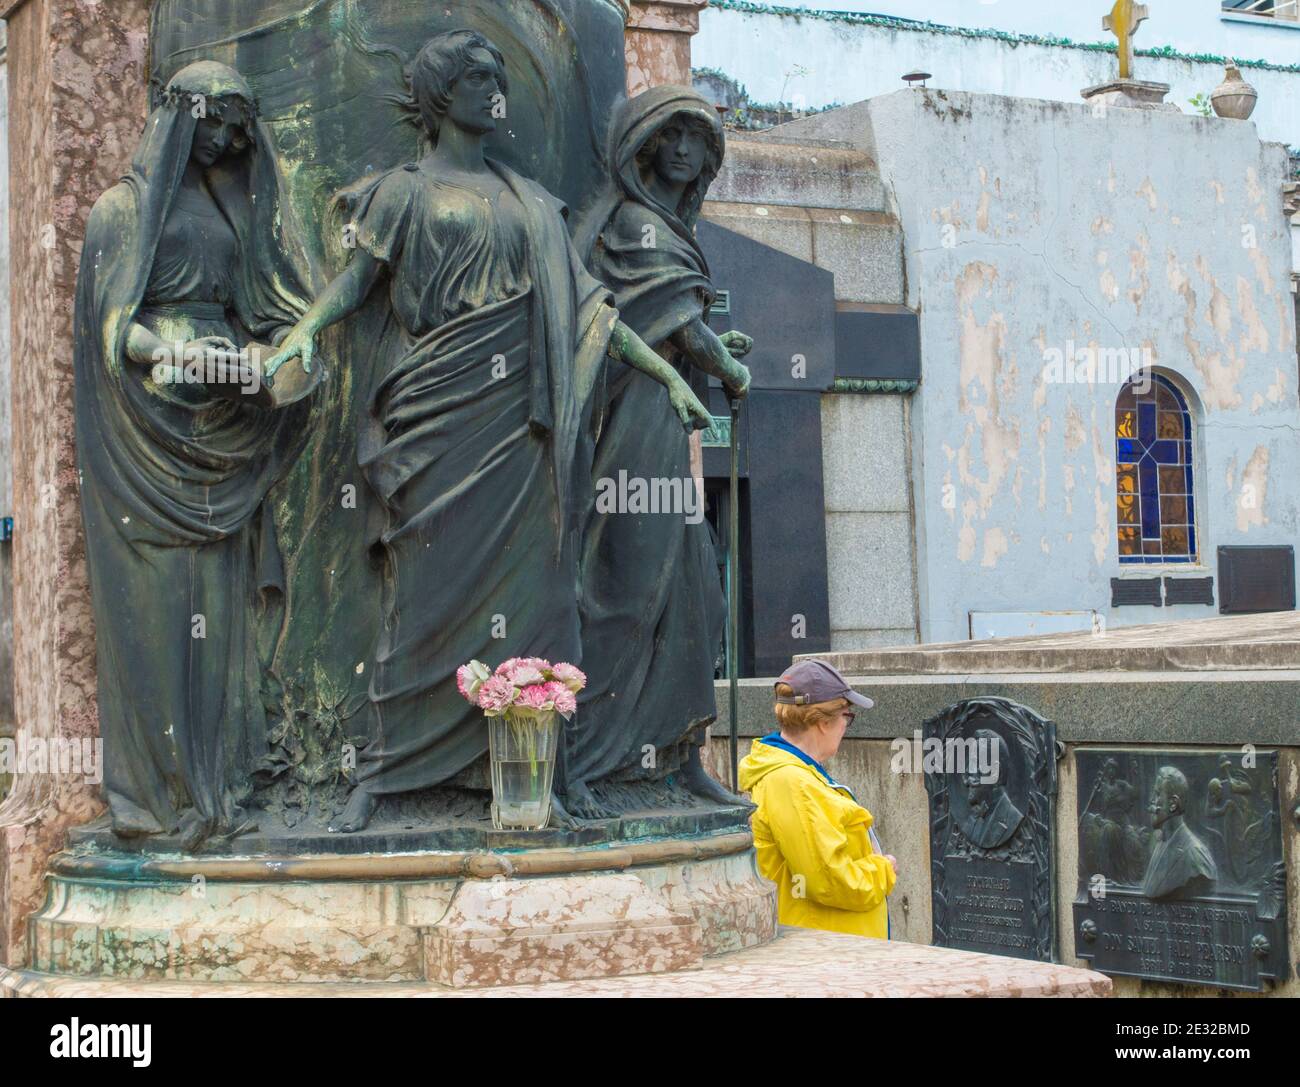 Woman walks among above-ground tombs in Recoleta Cemetery, Buenos Aires, Argentina Stock Photo